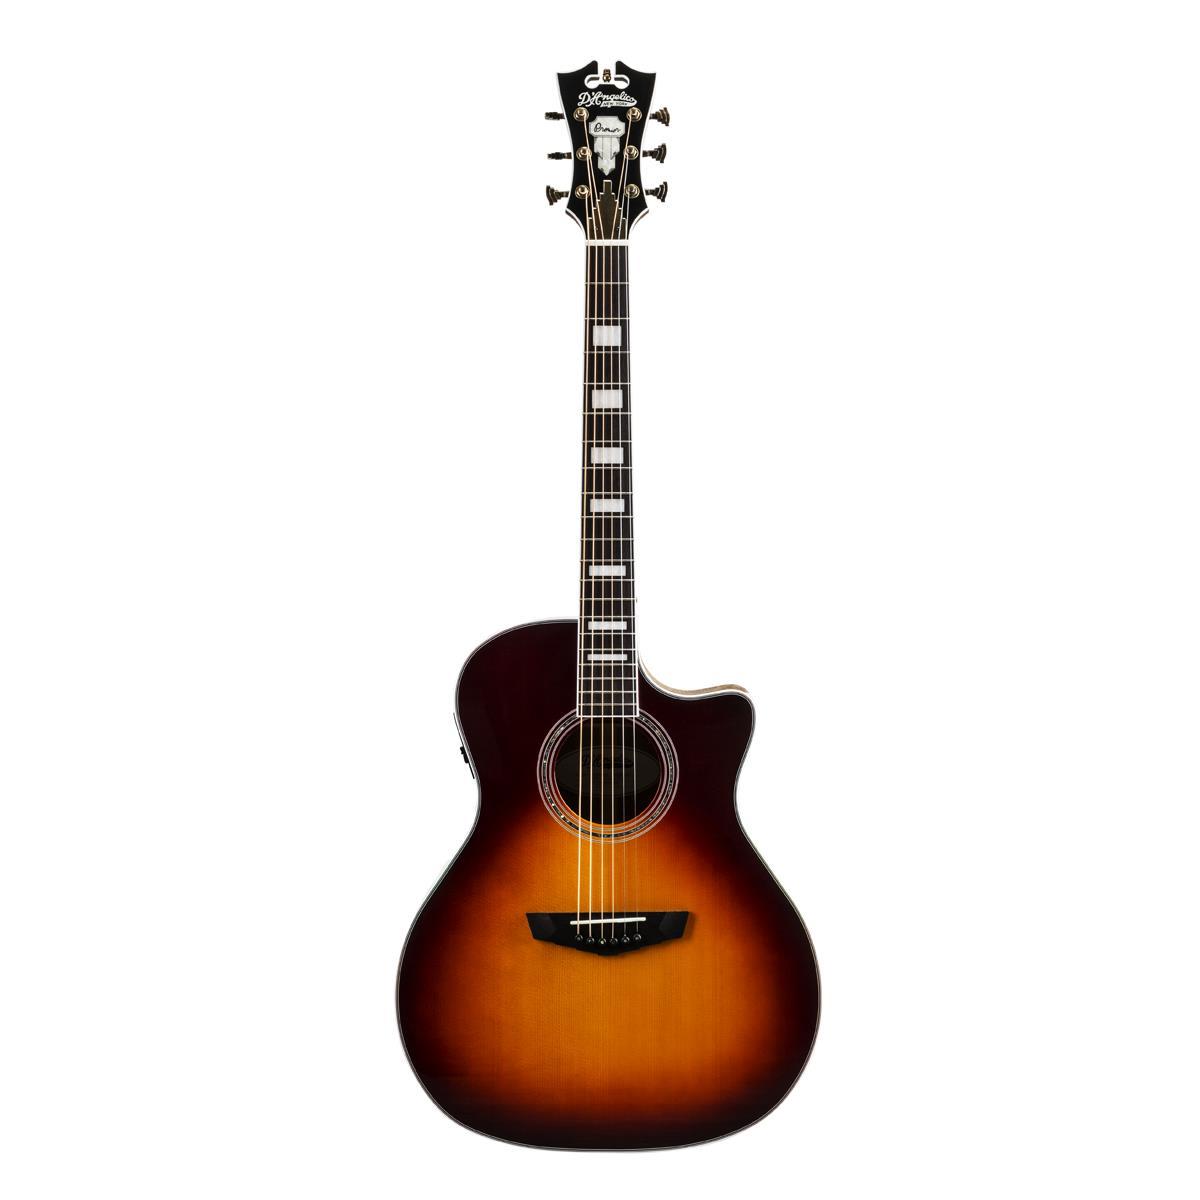 DAngelico Guitars Premier Gramercy Single Acoustic Electric for $349 Shipped